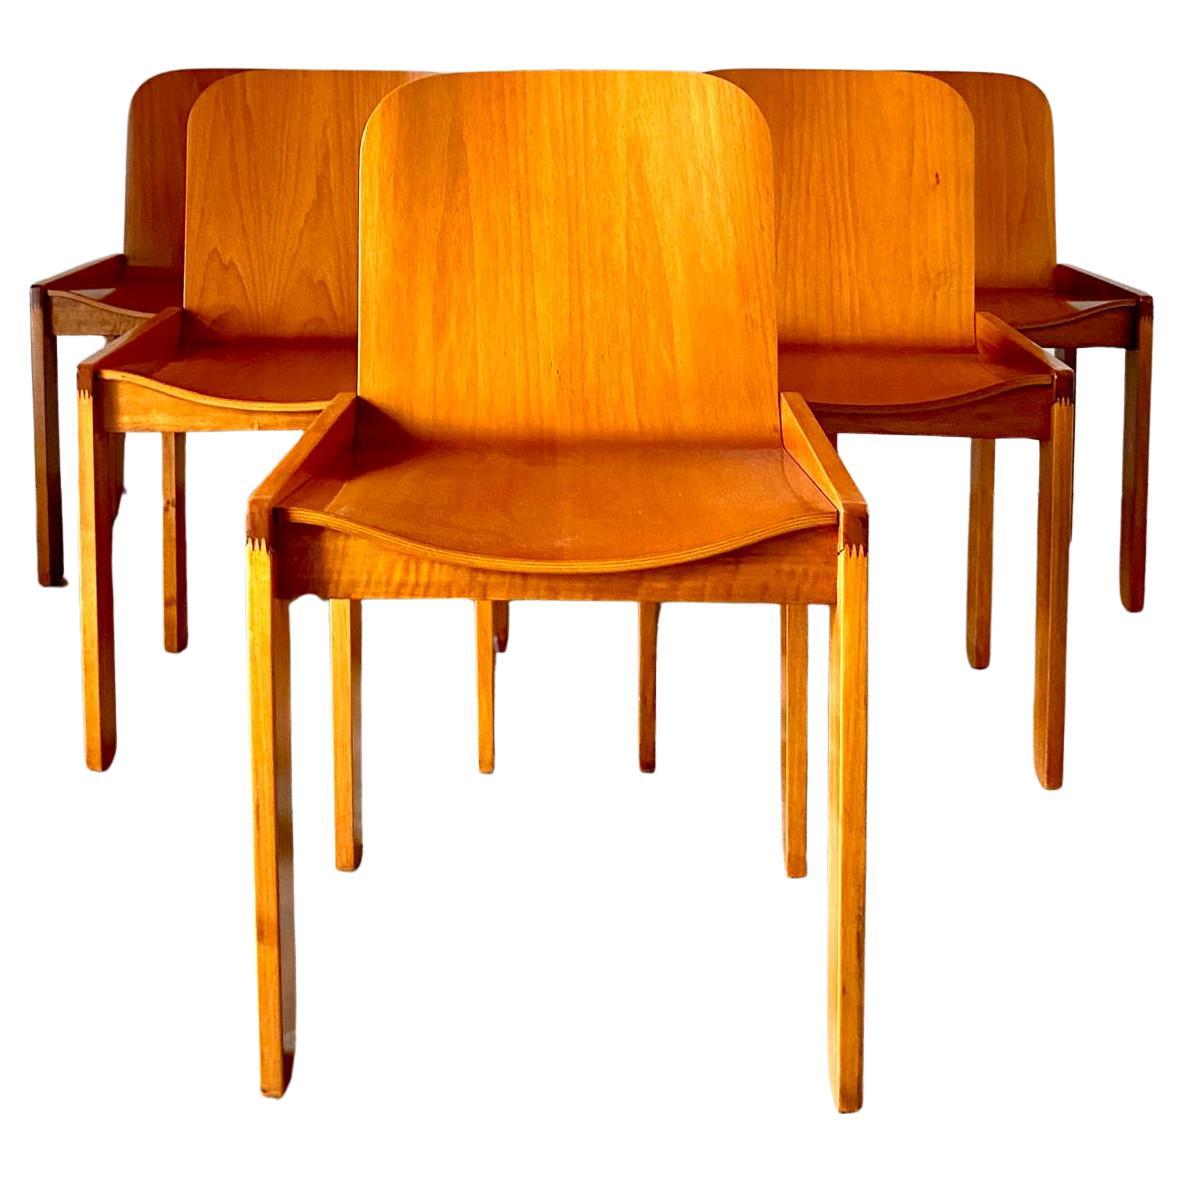 Mid Century modern wood dining chairs, Afra and Tobia Scarpa for Molteni, Italy 